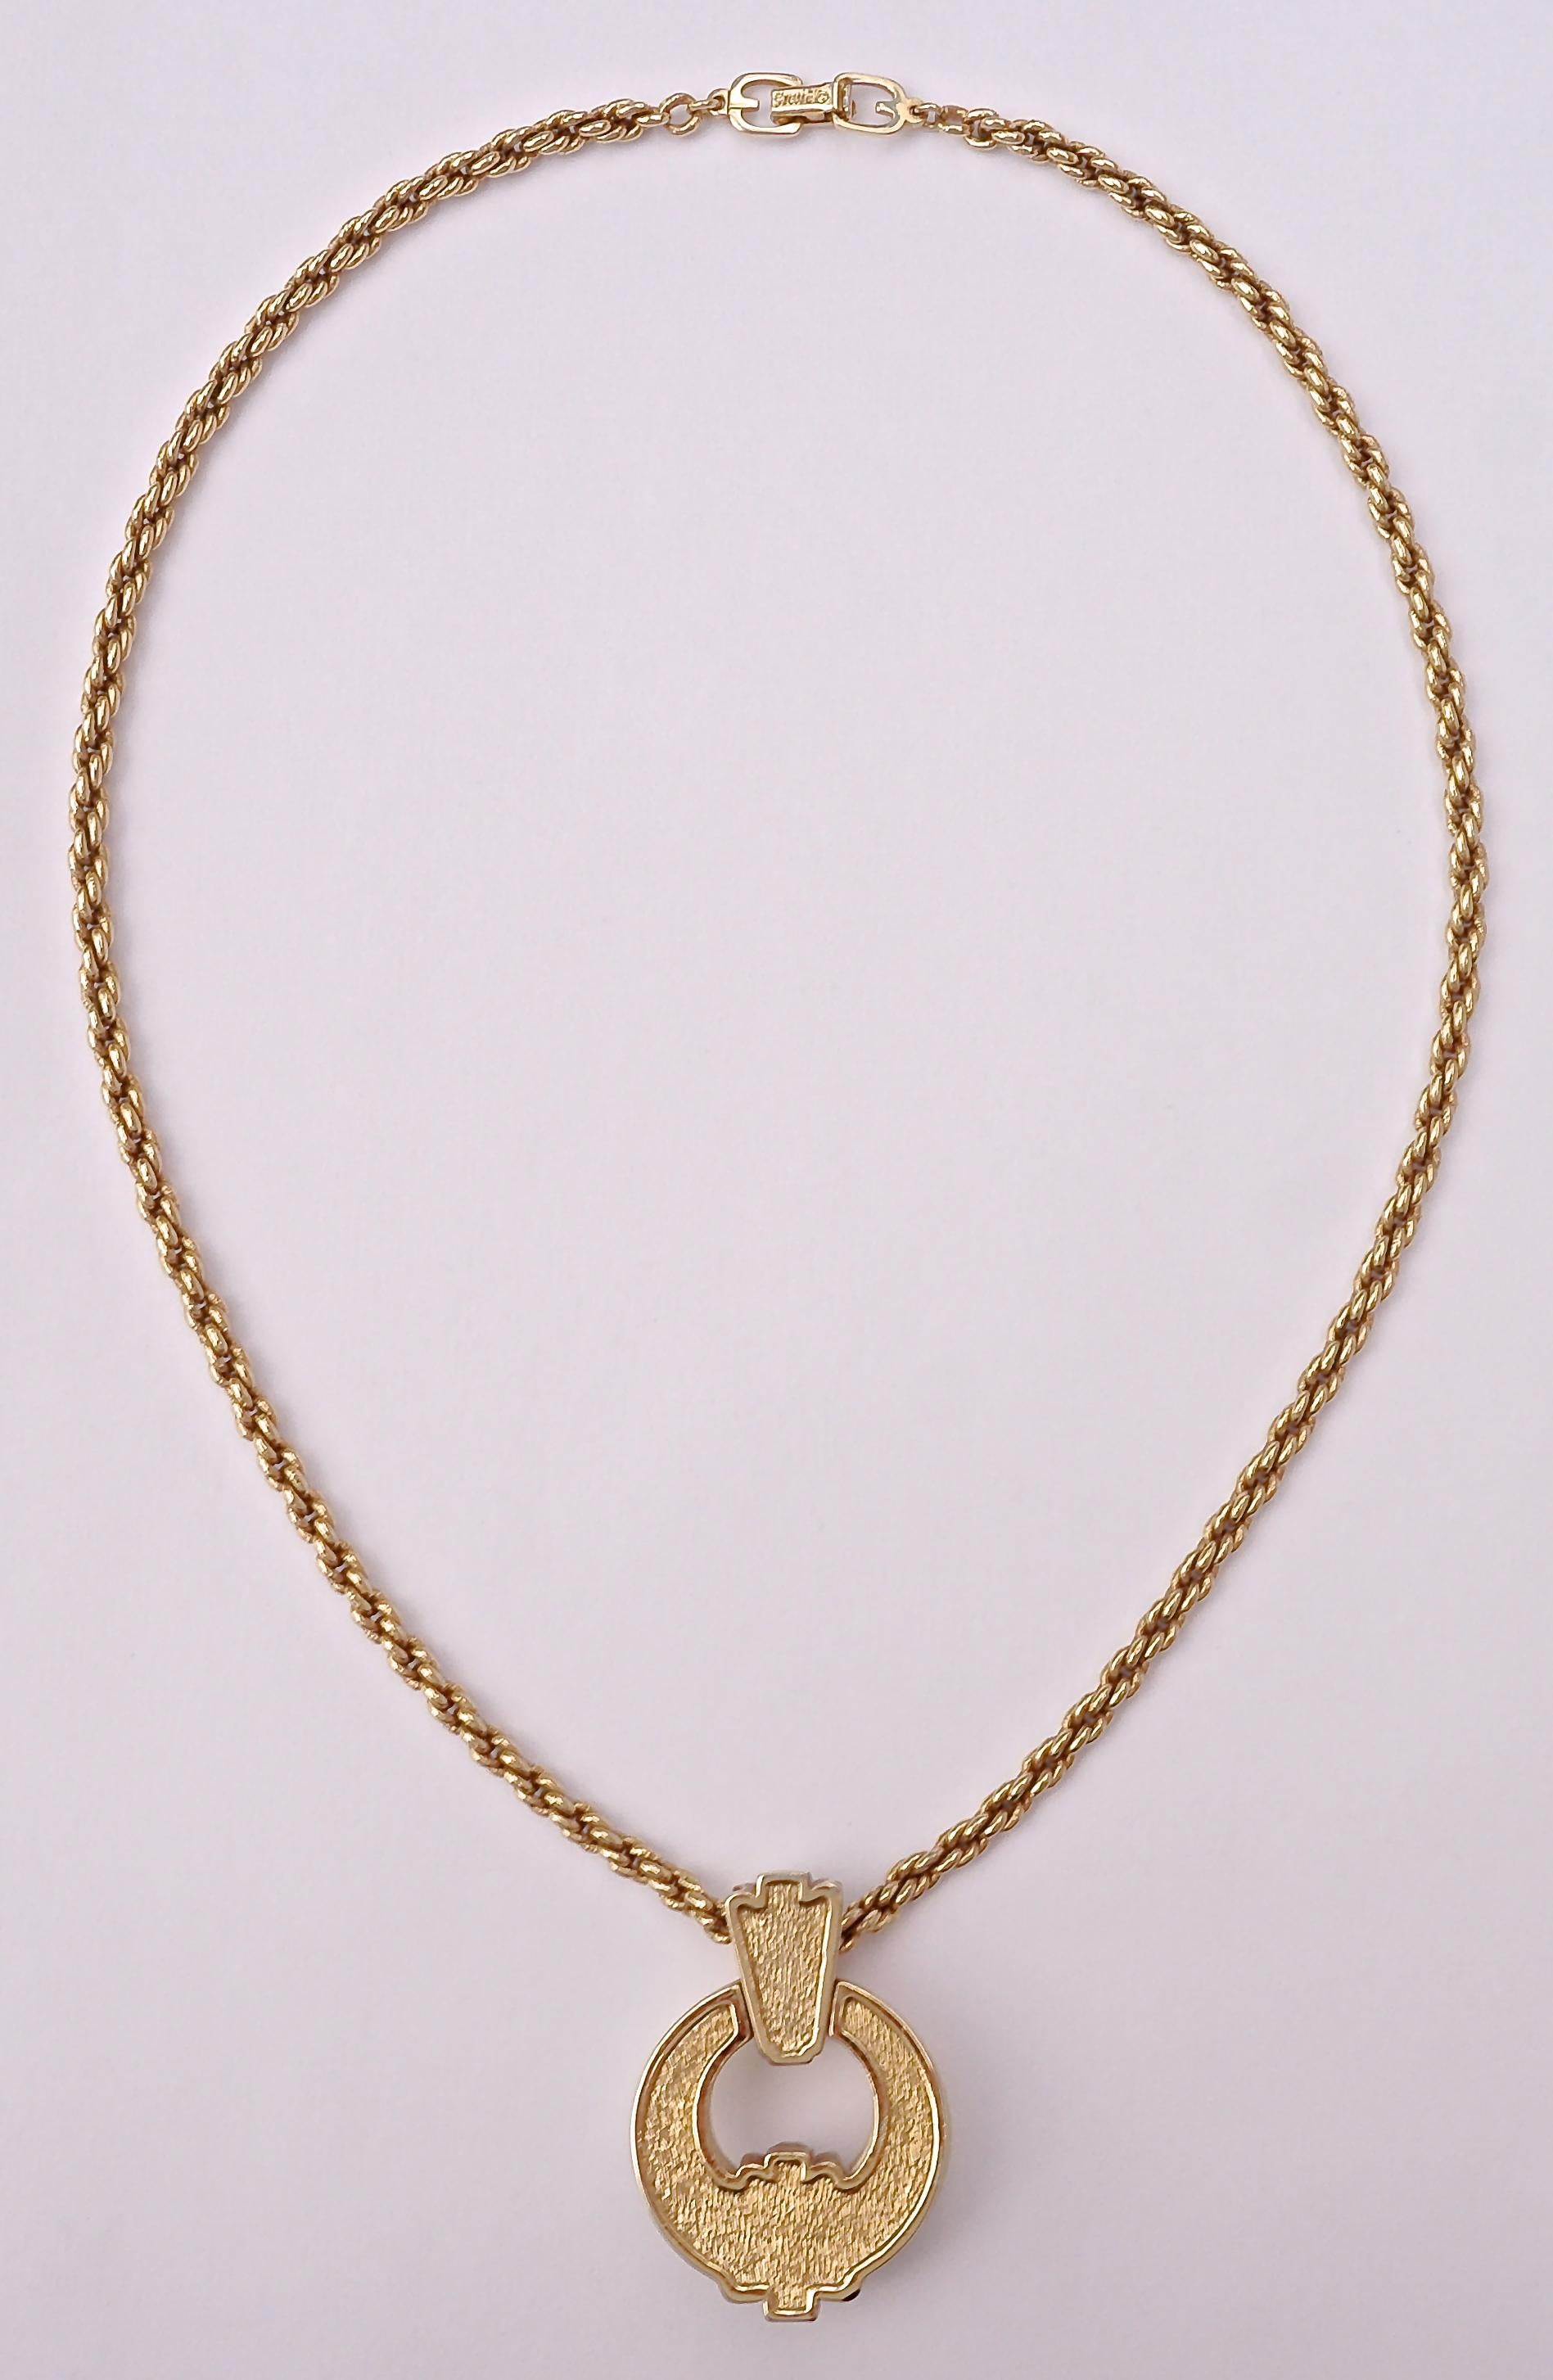 Grossé gold plated heavy twisted link necklace, featuring a lovely cream moulded resin pendant decorated with faceted square and round rhinestones, in the Art Deco style. Length 48.3cm / 19 inches, and the pendant is diameter 2.9cm / 1.14